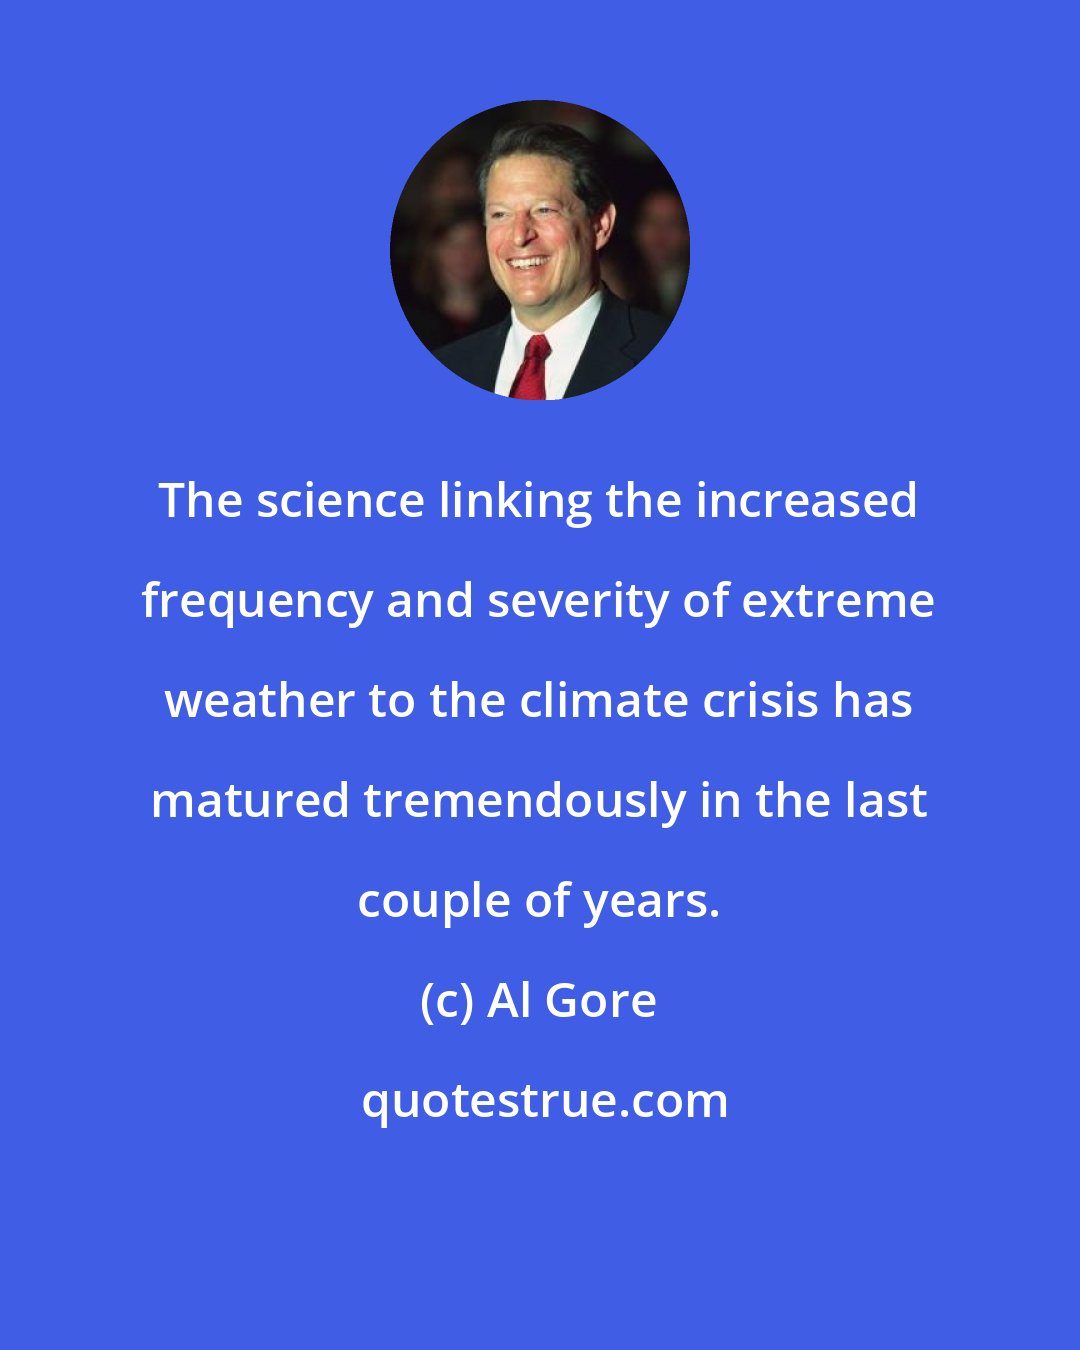 Al Gore: The science linking the increased frequency and severity of extreme weather to the climate crisis has matured tremendously in the last couple of years.